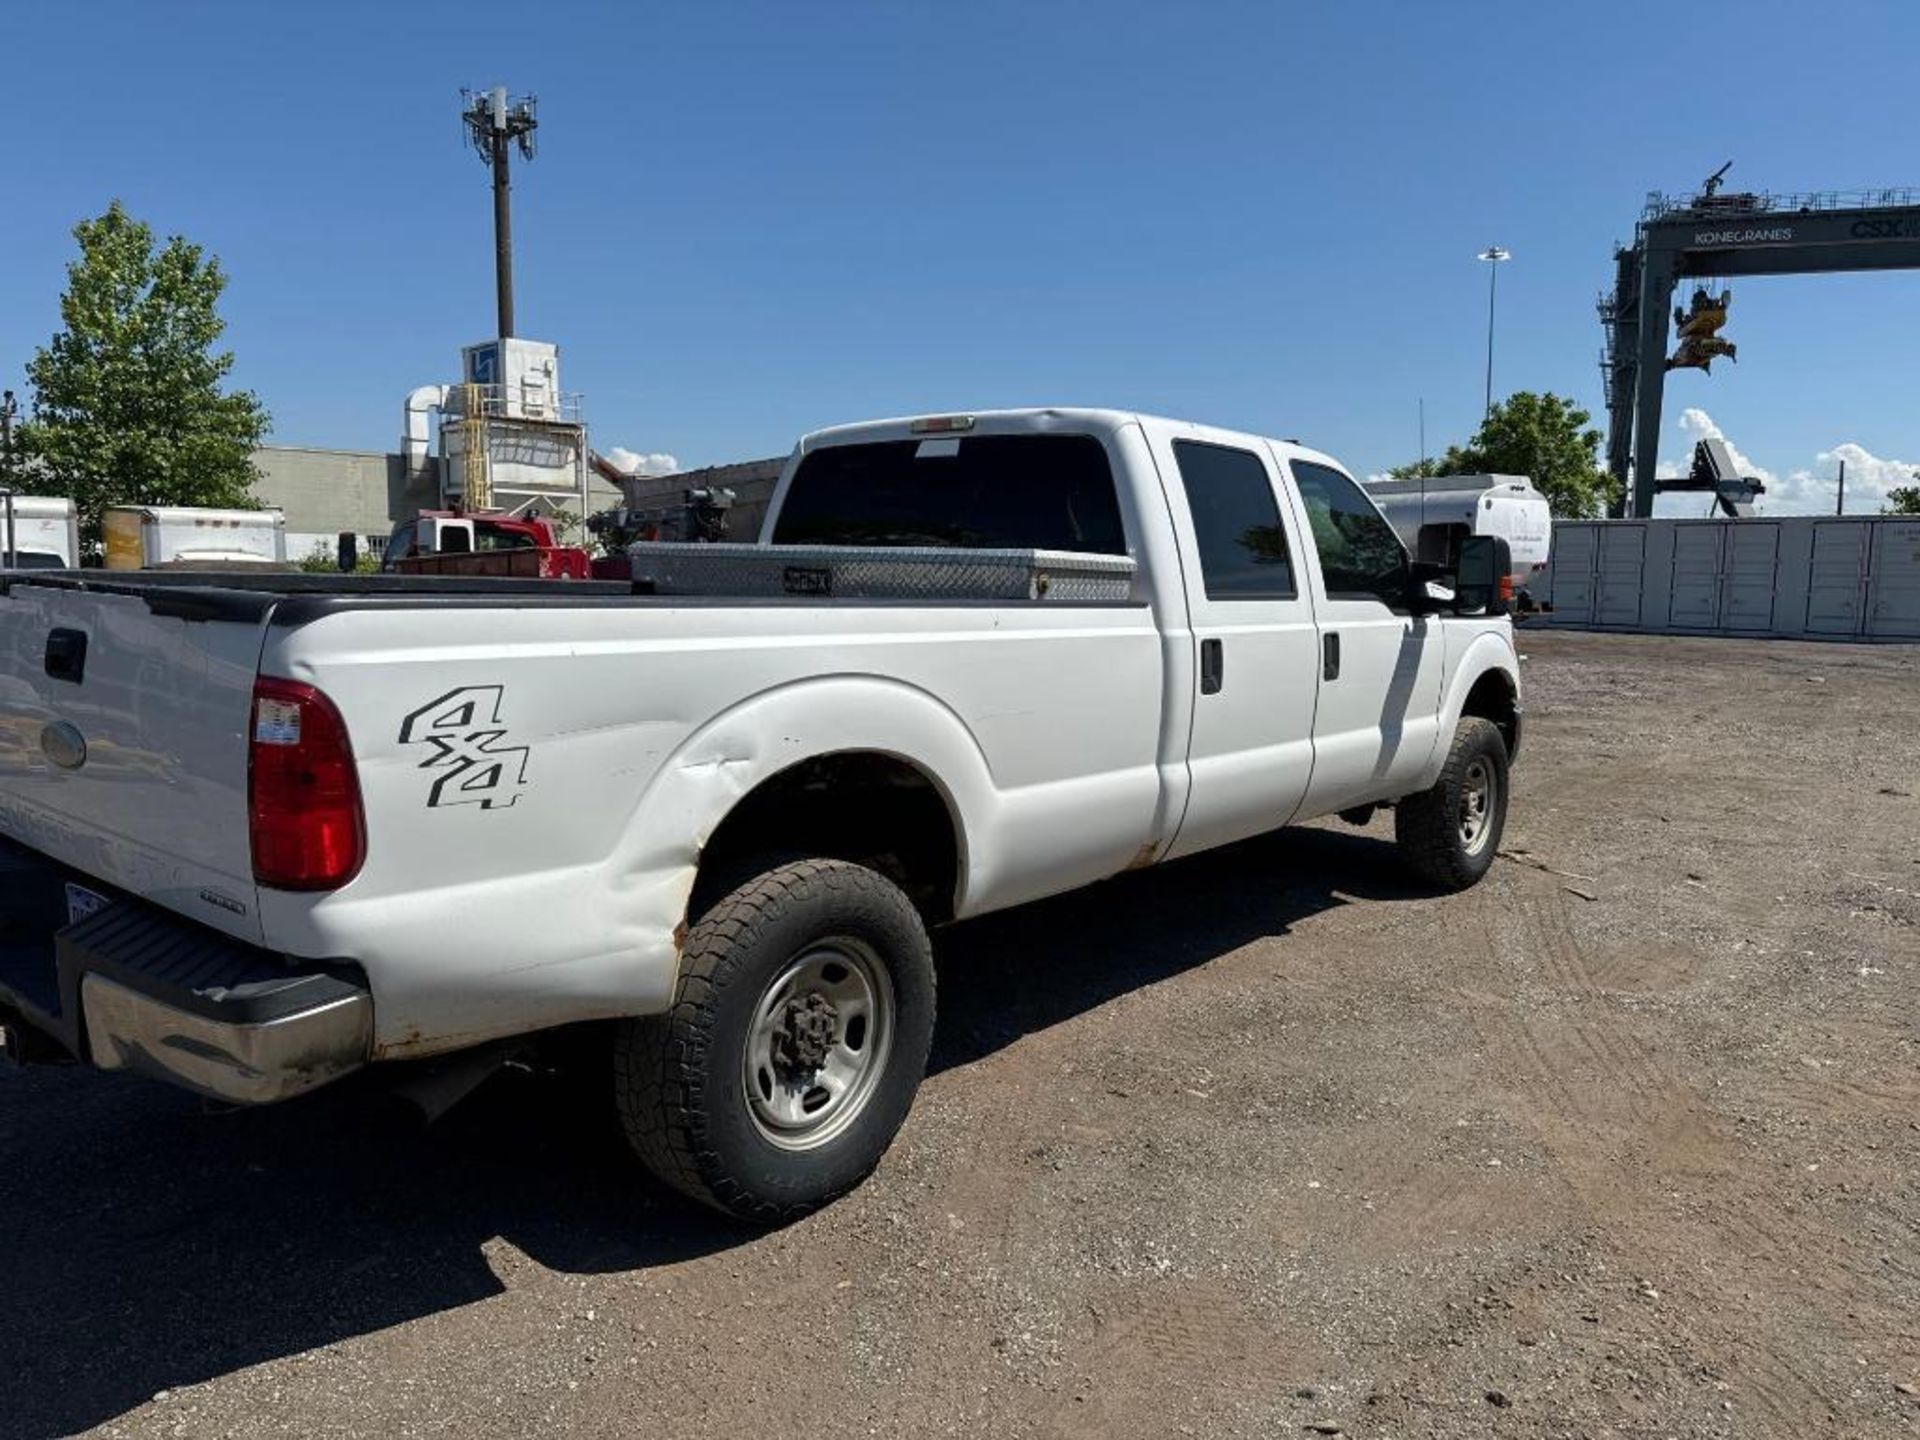 2012 Ford F-350 4x4 King Ranch Pickup Truck - Image 8 of 13